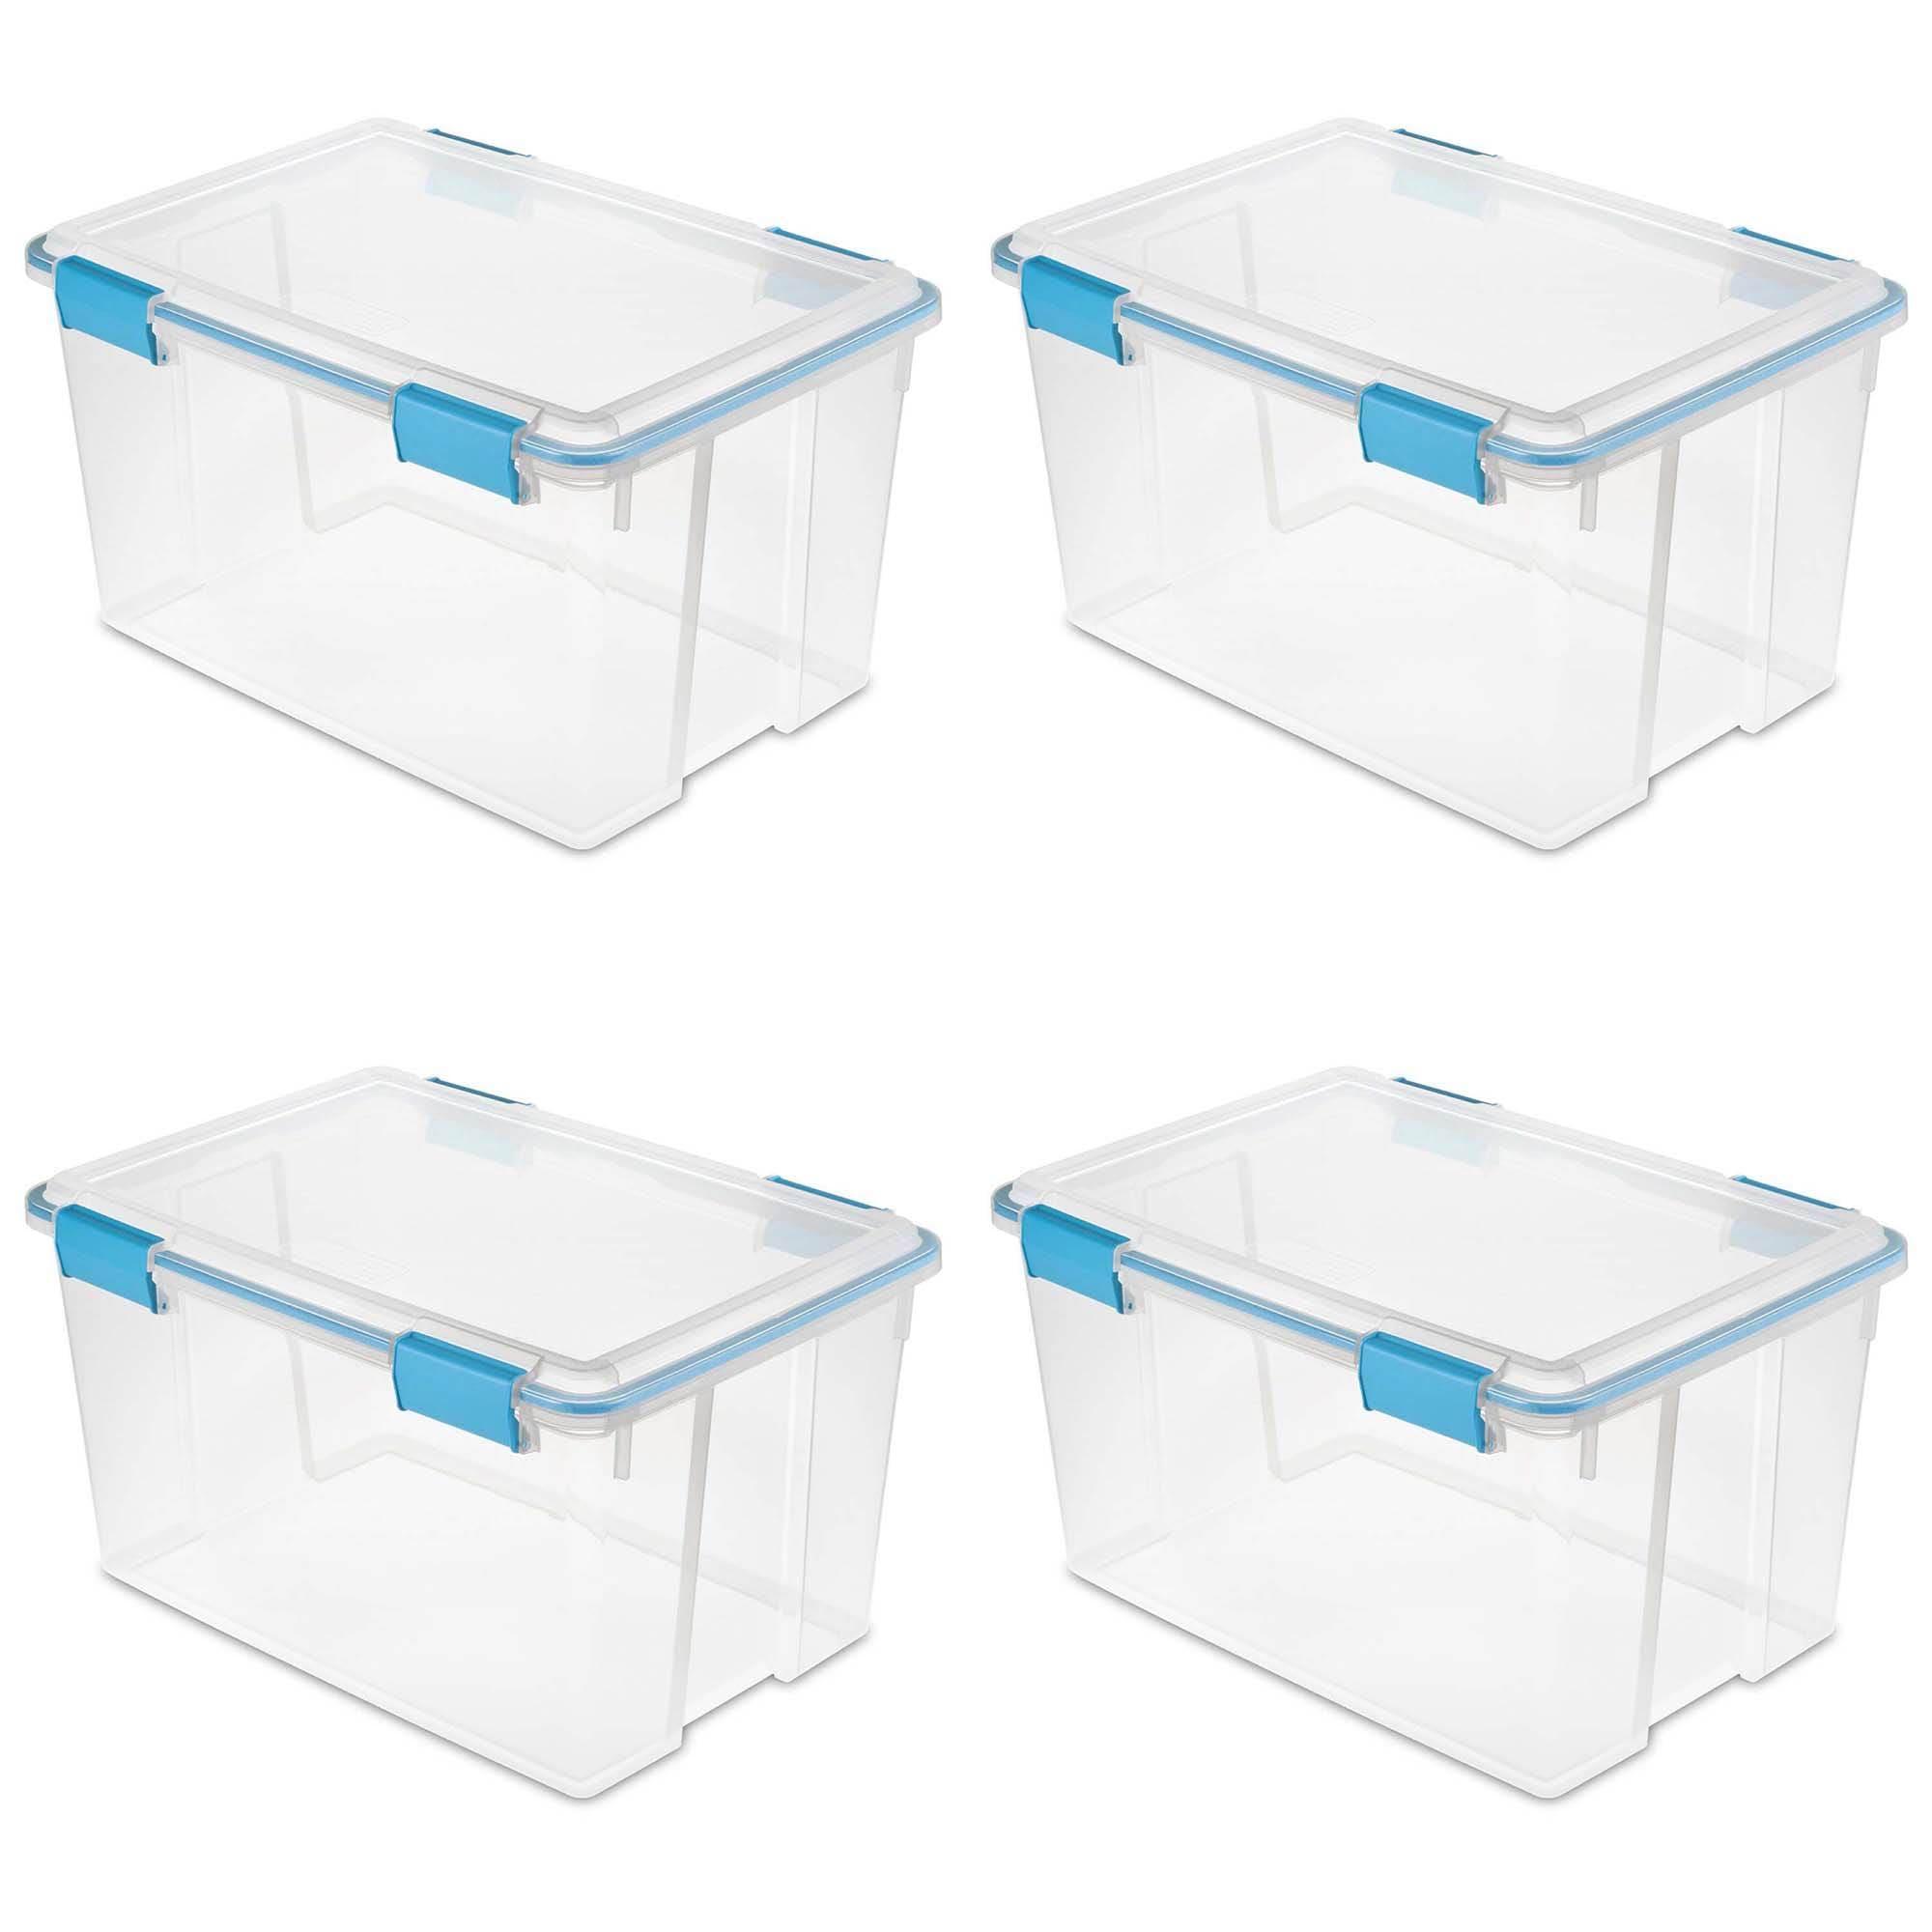  Sterilite 32 Quart ClearView Latch Box, Bin with Latching Lid,  Stackable, Organize Clothes, Shoes & Accessories in Closet, Clear Base & Lid,  6-Pack - Plastic Storage Containers